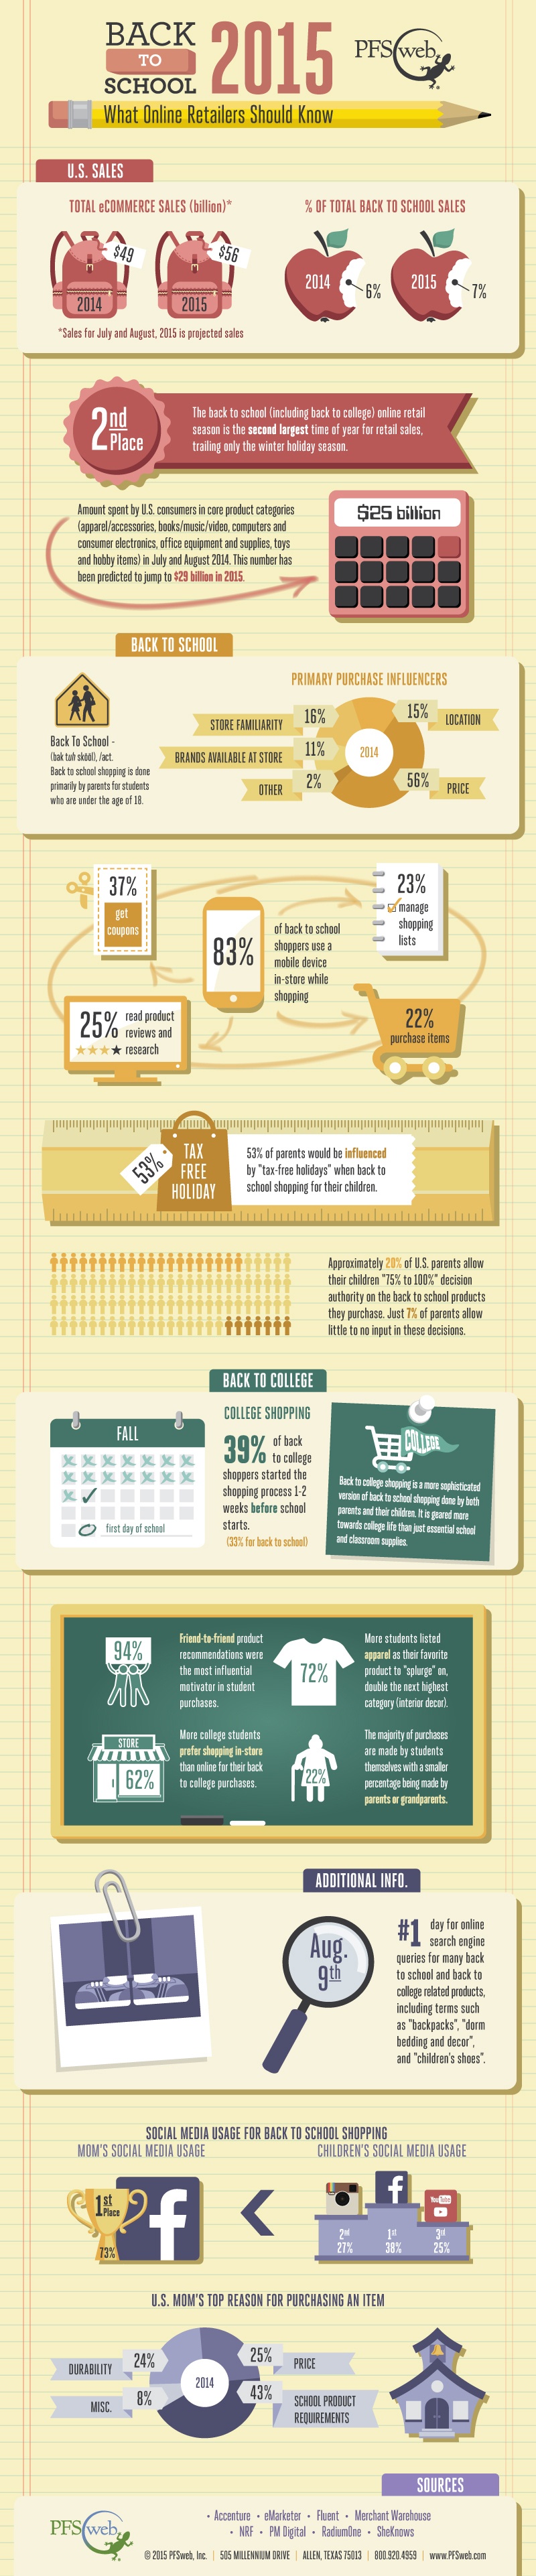 2015 Back-to-School eCommerce Stats Infographic